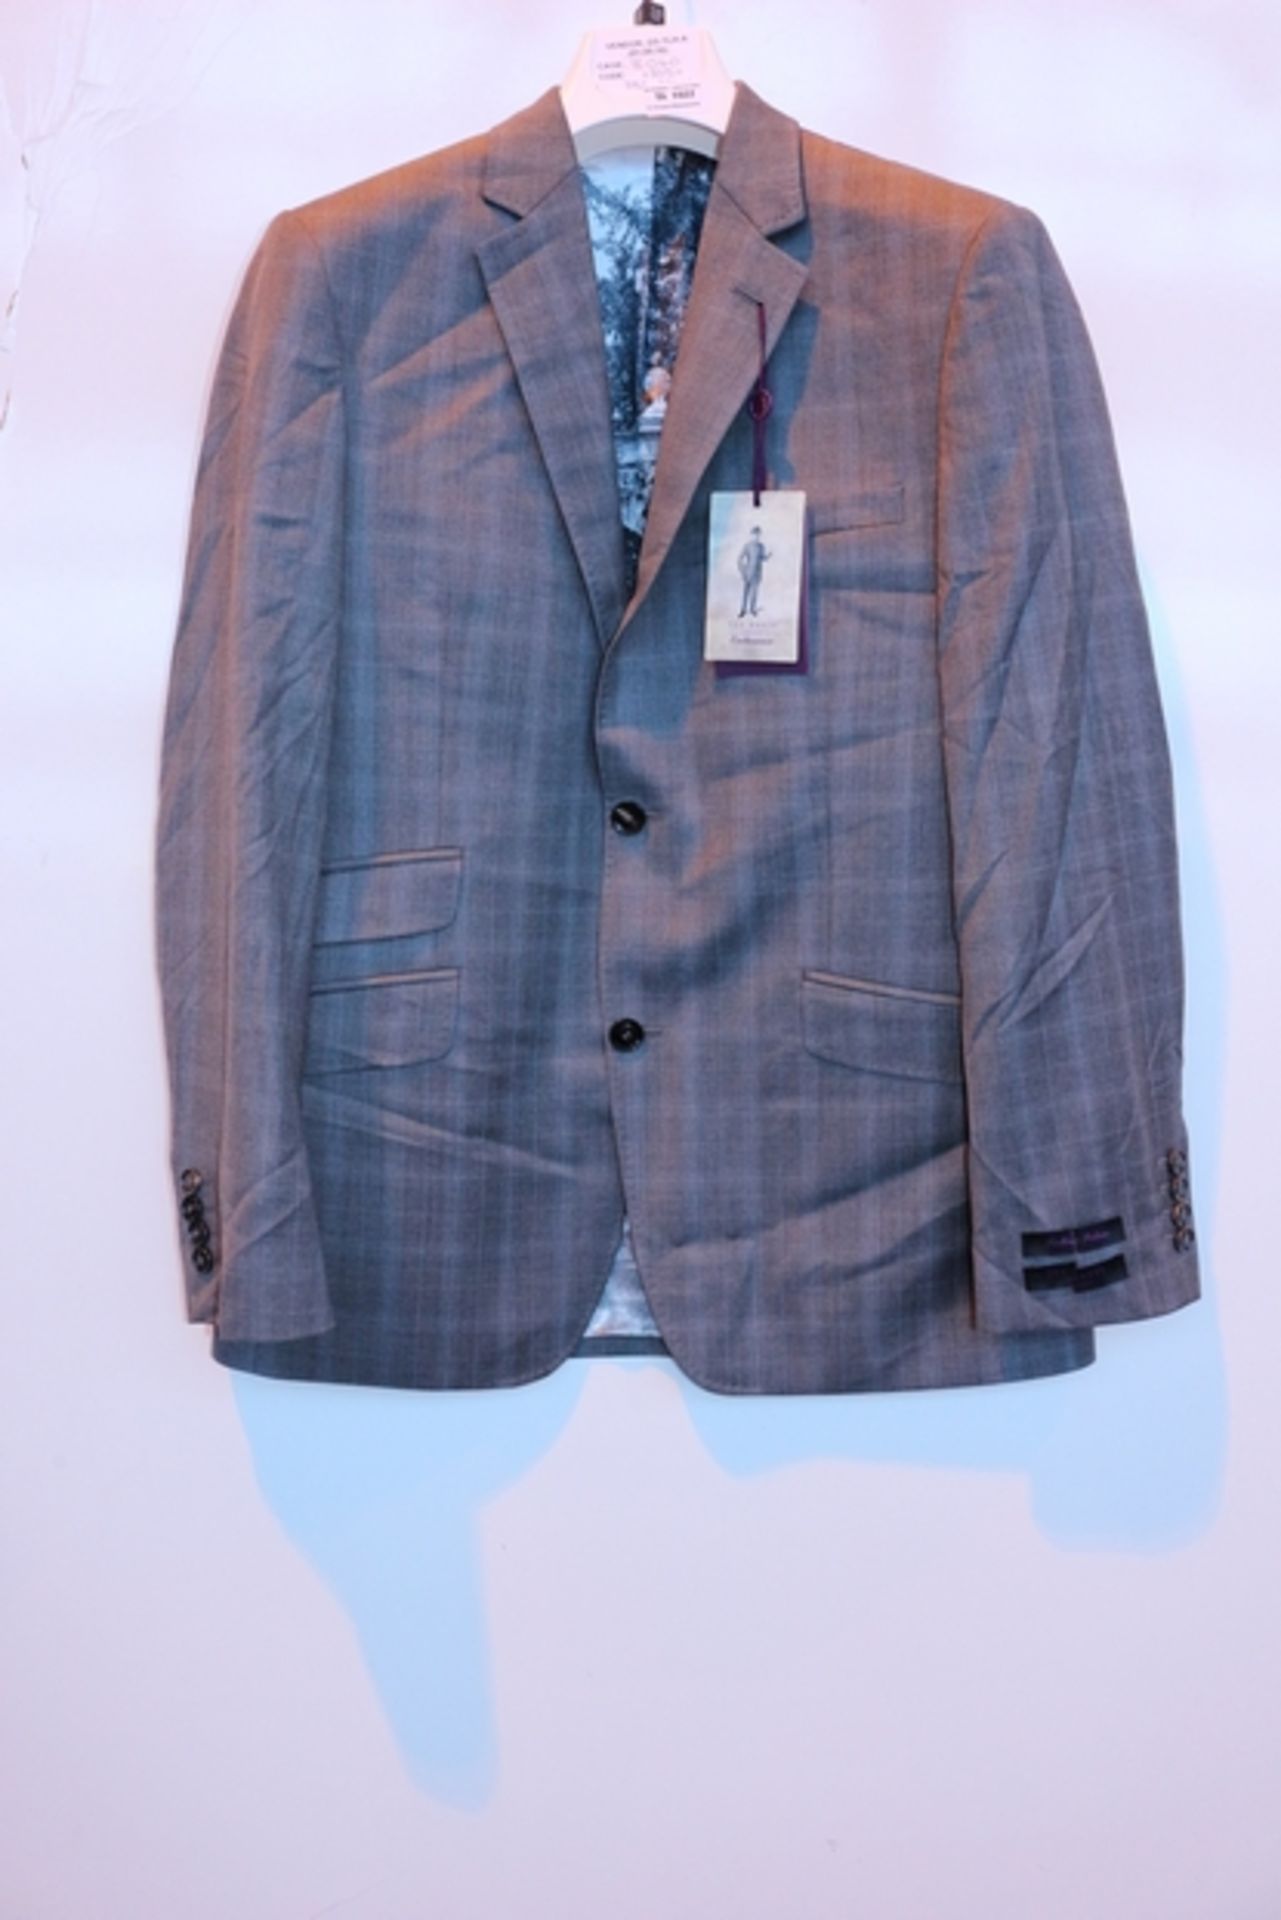 1X BRAND NEW TB DESIGNER JACKET SIZE 38S RRP £300 (DS-TLH-A) (8.040) (38237601)